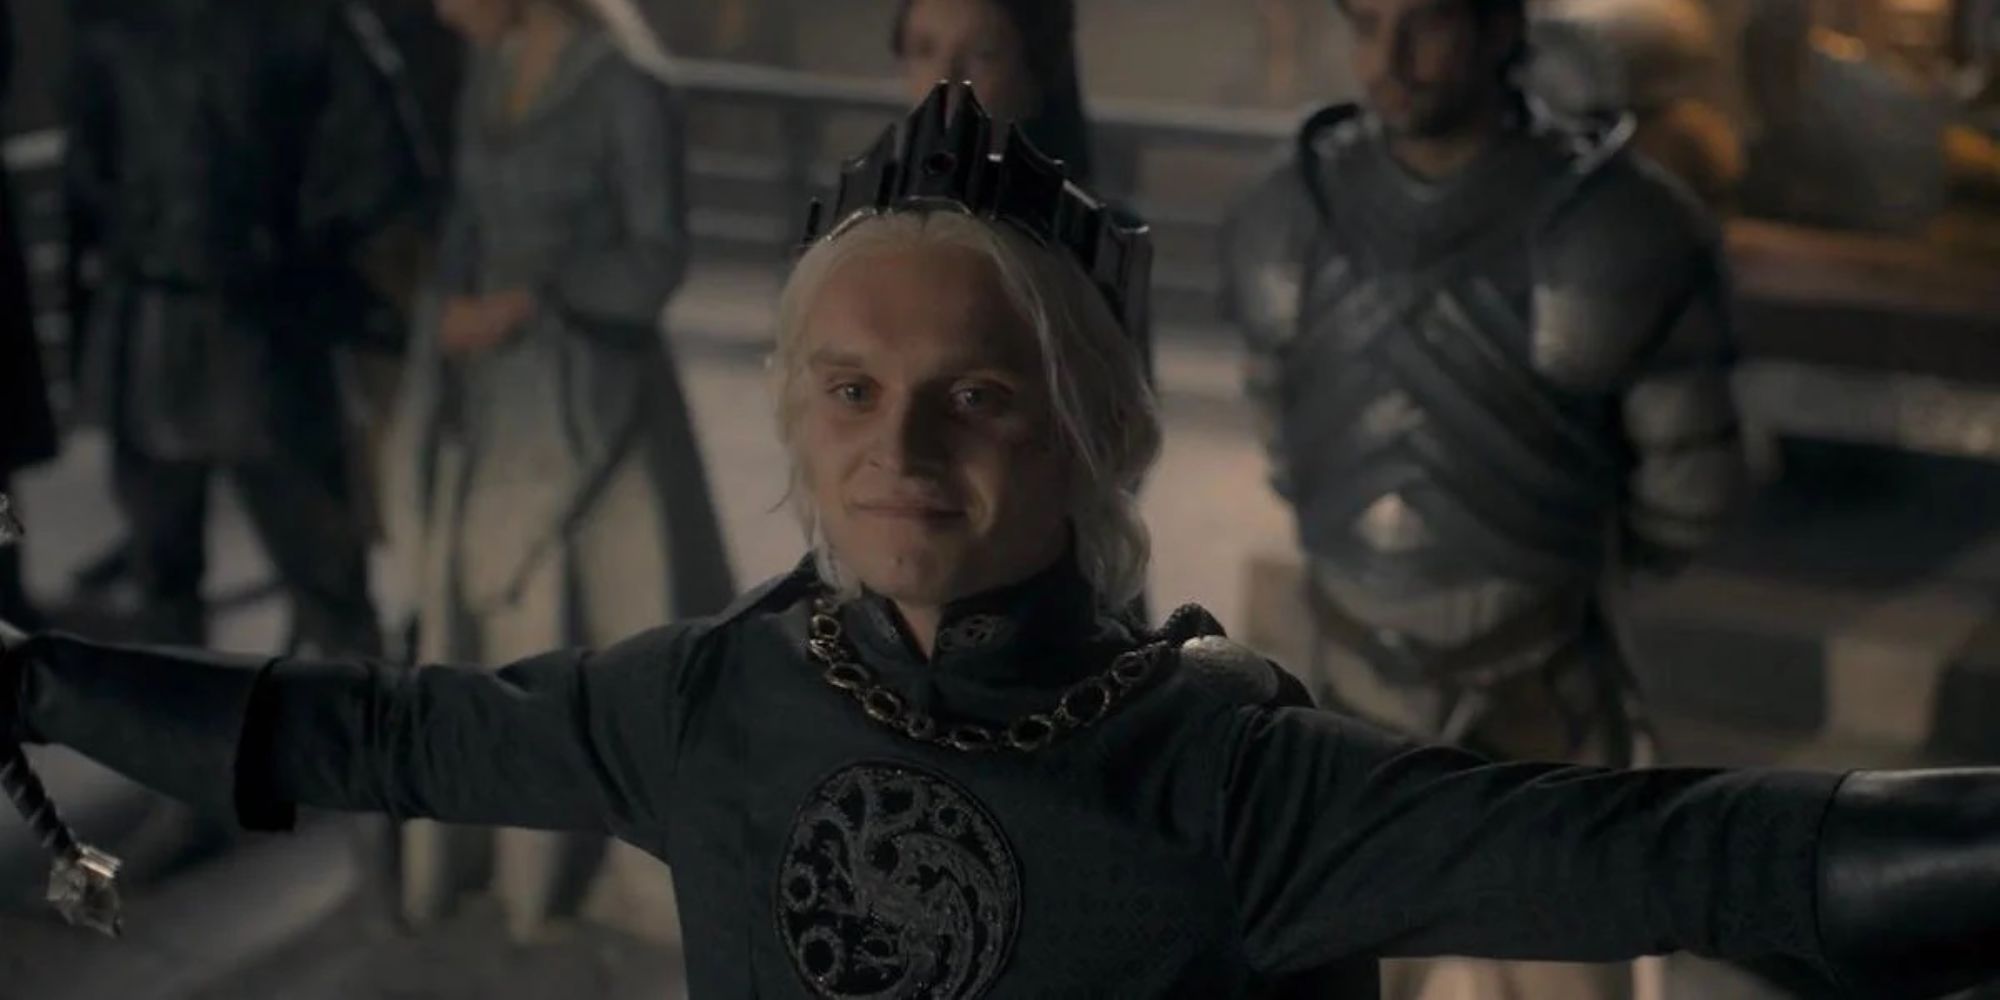 Aegon II Targaryen is crowned King of Westeros in HBO's House of the Dragon